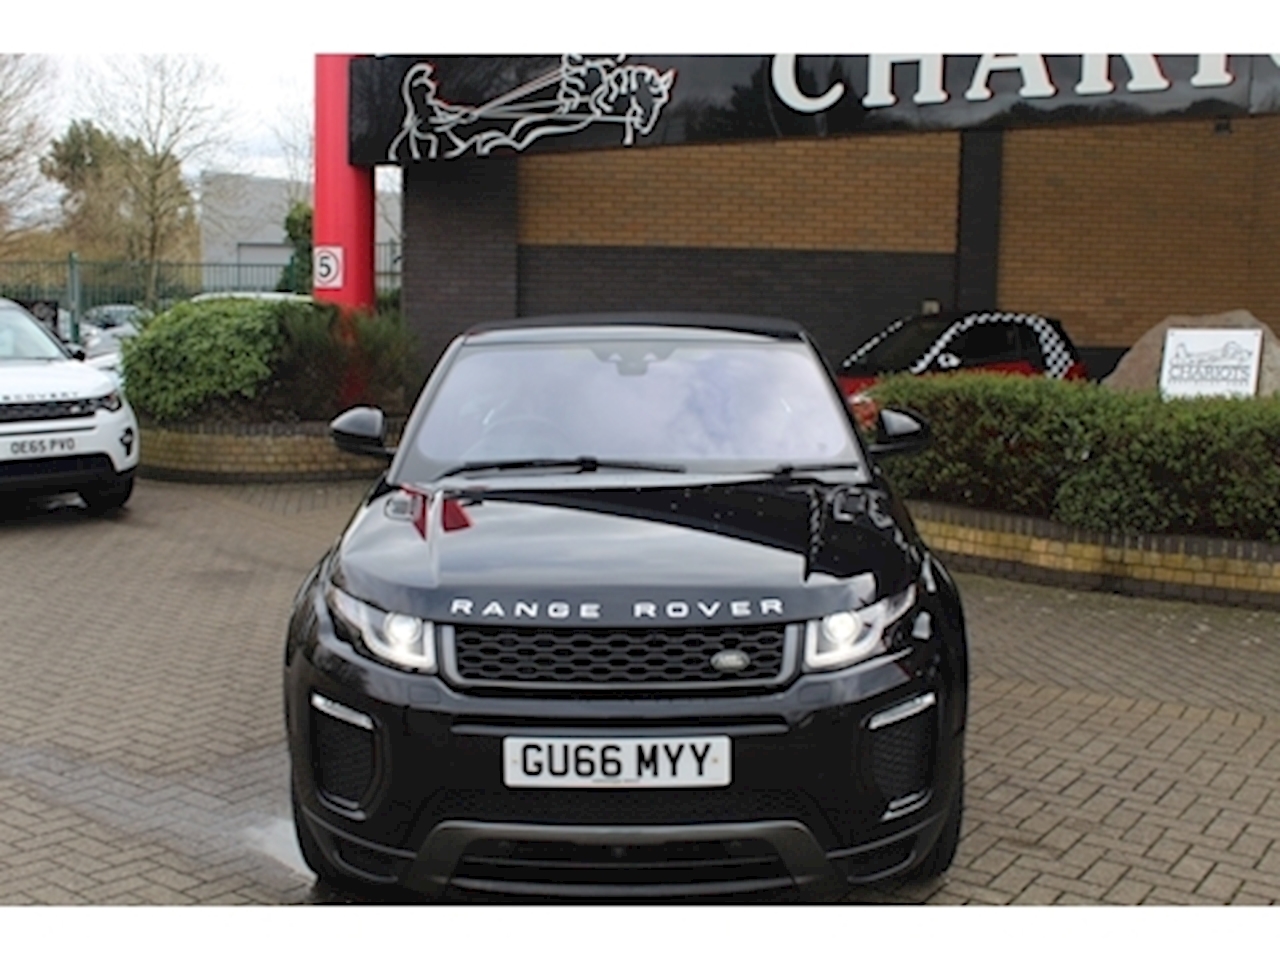 Range Rover Evoque Si4 Hse Dynamic Lux Convertible 2.0 Automatic Petrol